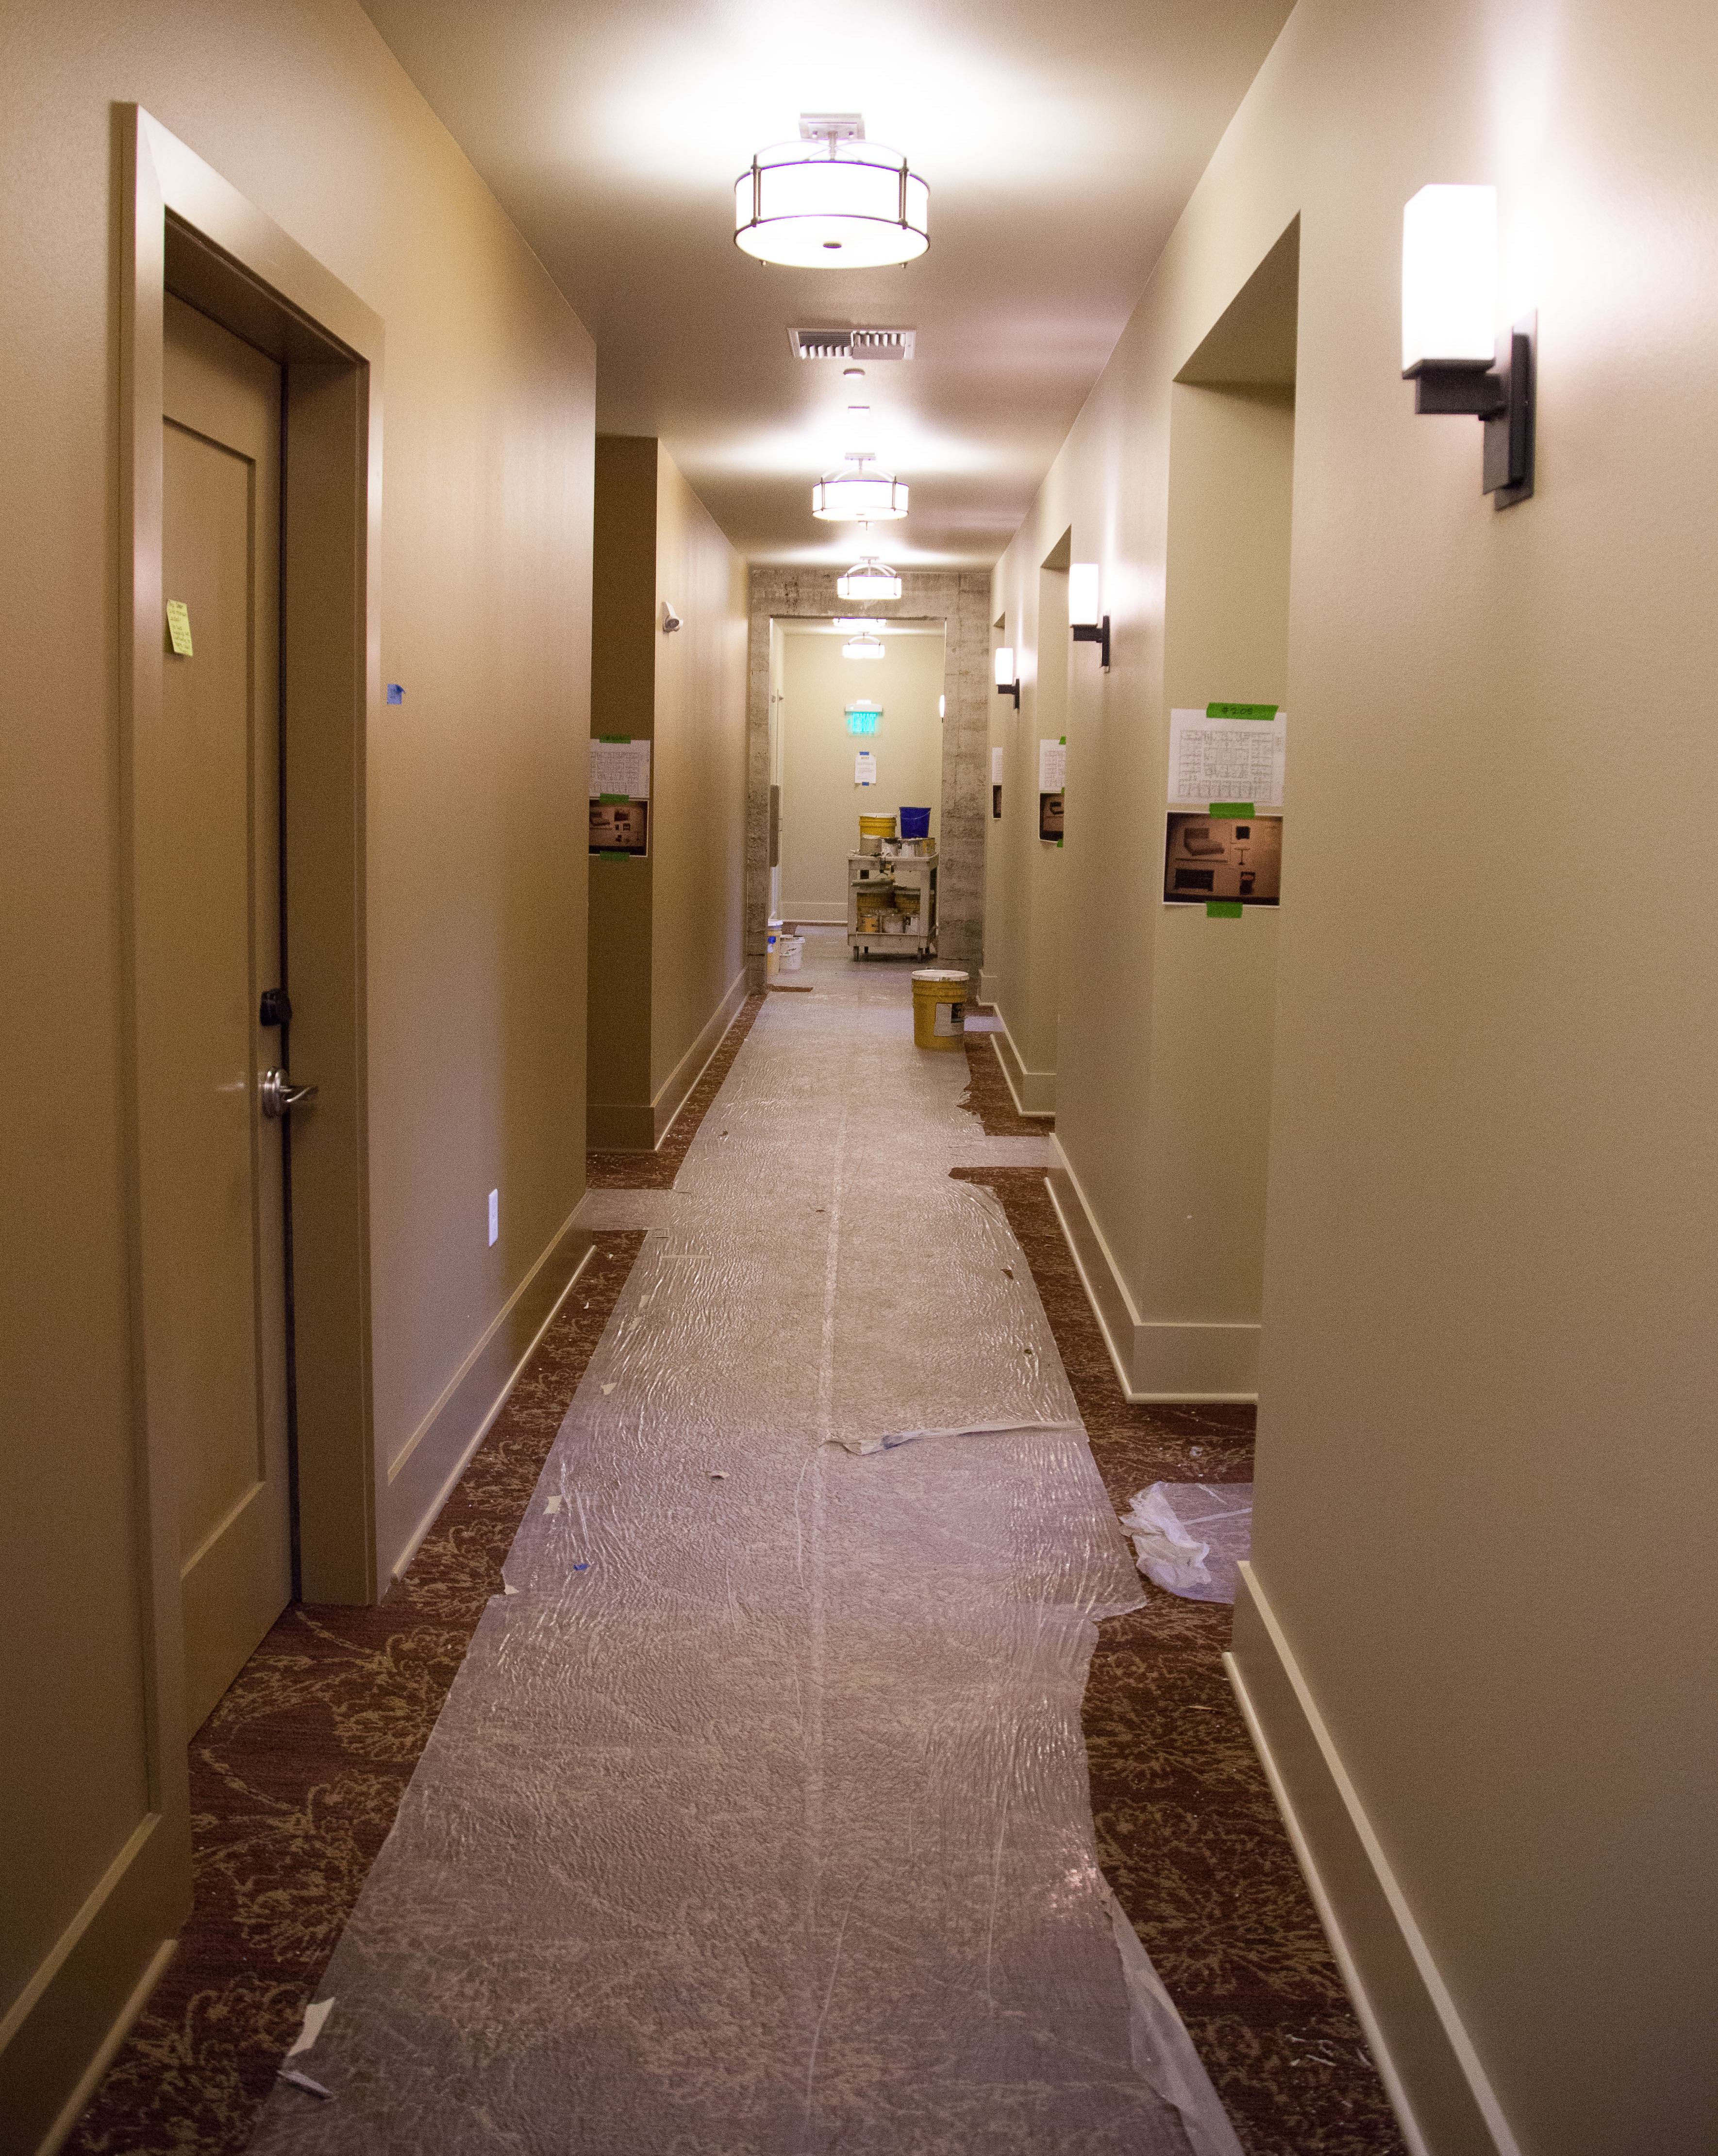 A hallway of rooms at the Inn at Lynden, with carpet protected during final construction.